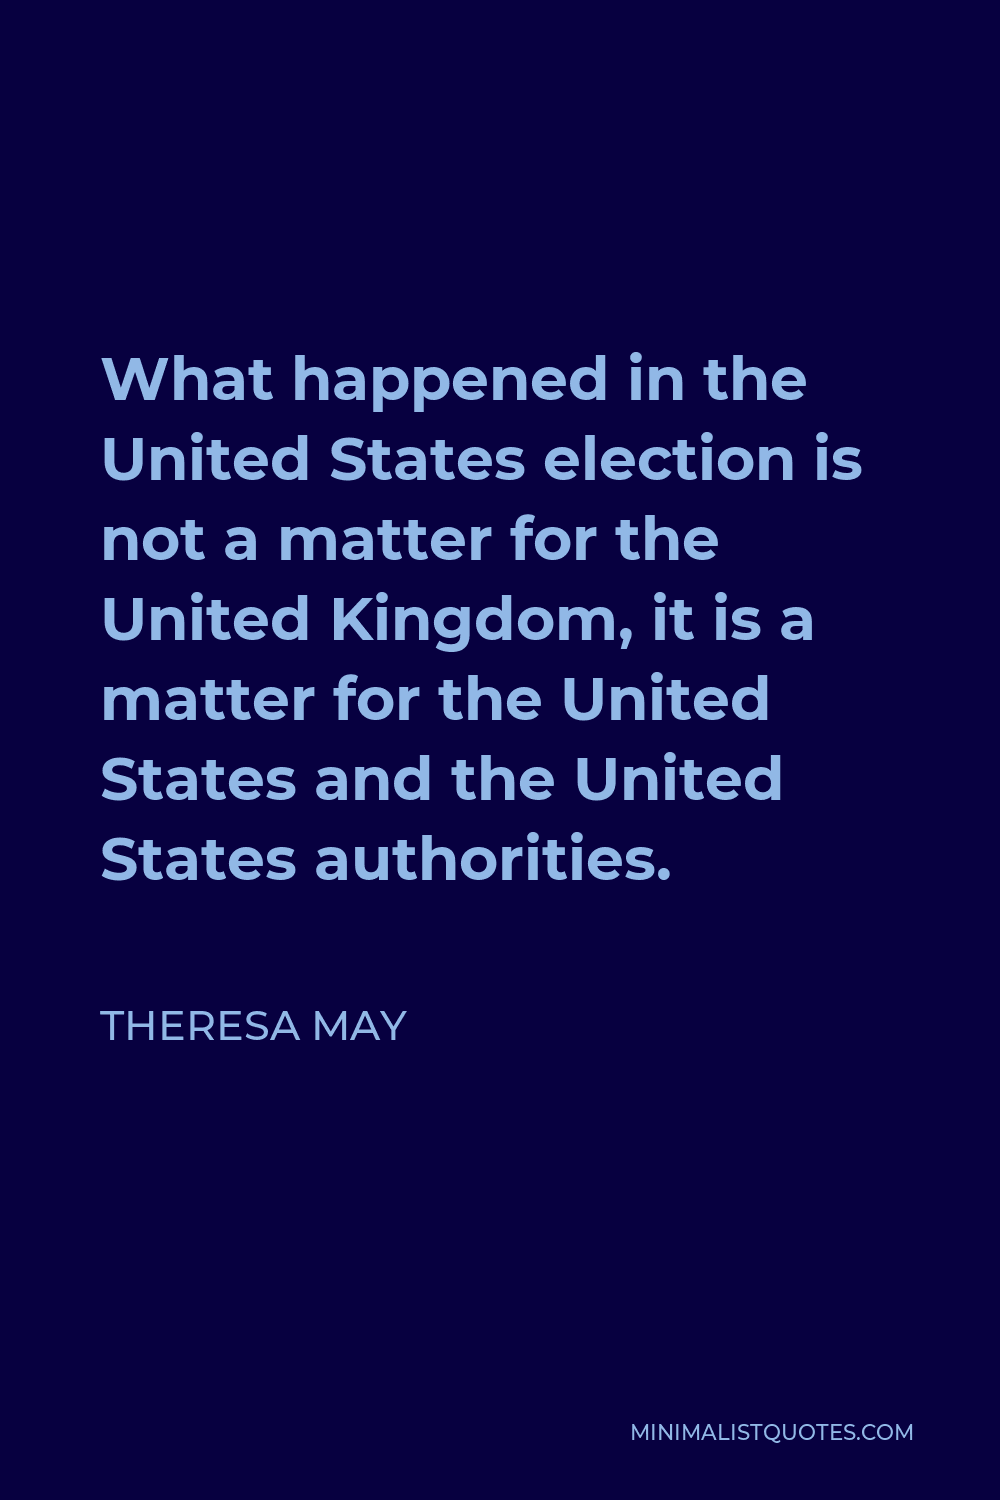 Theresa May Quote - What happened in the United States election is not a matter for the United Kingdom, it is a matter for the United States and the United States authorities.